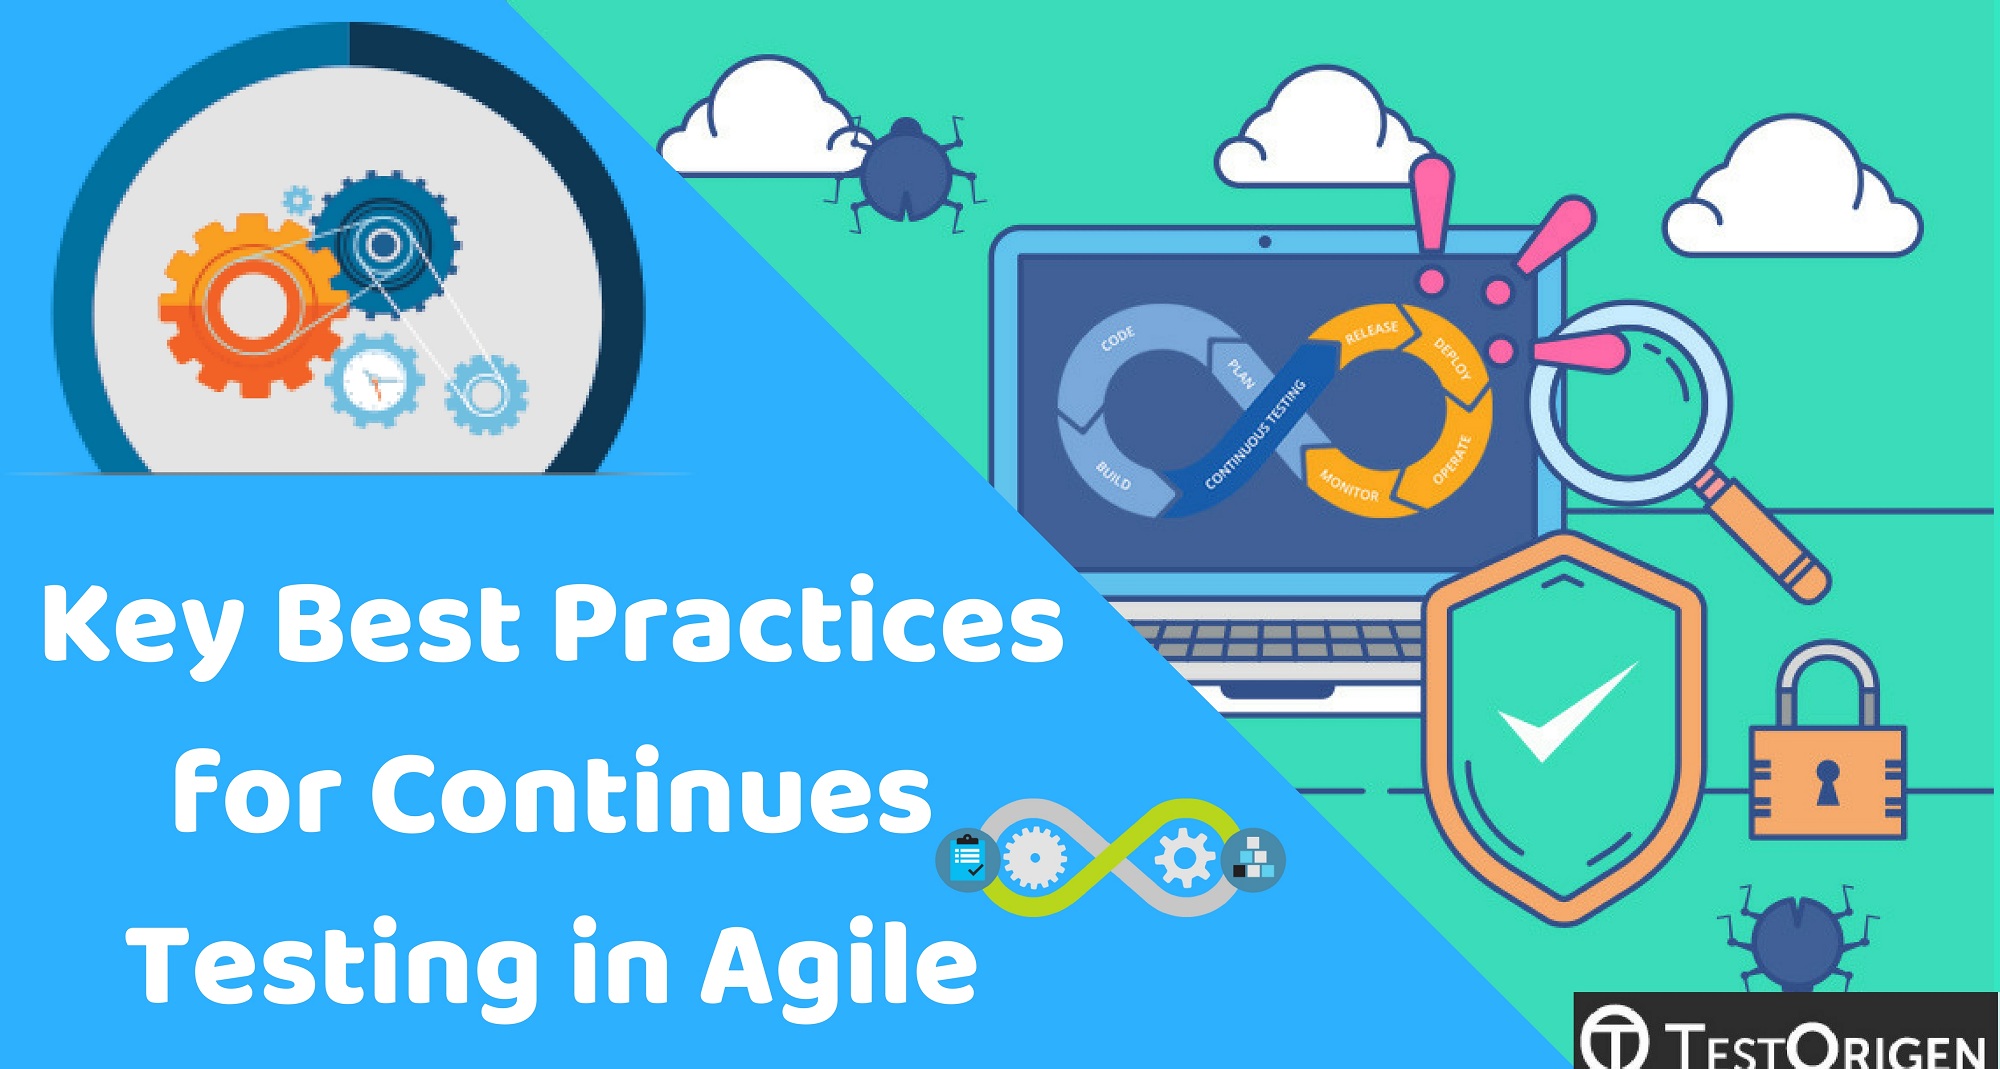 Key Best Practices for Continues Testing in Agile